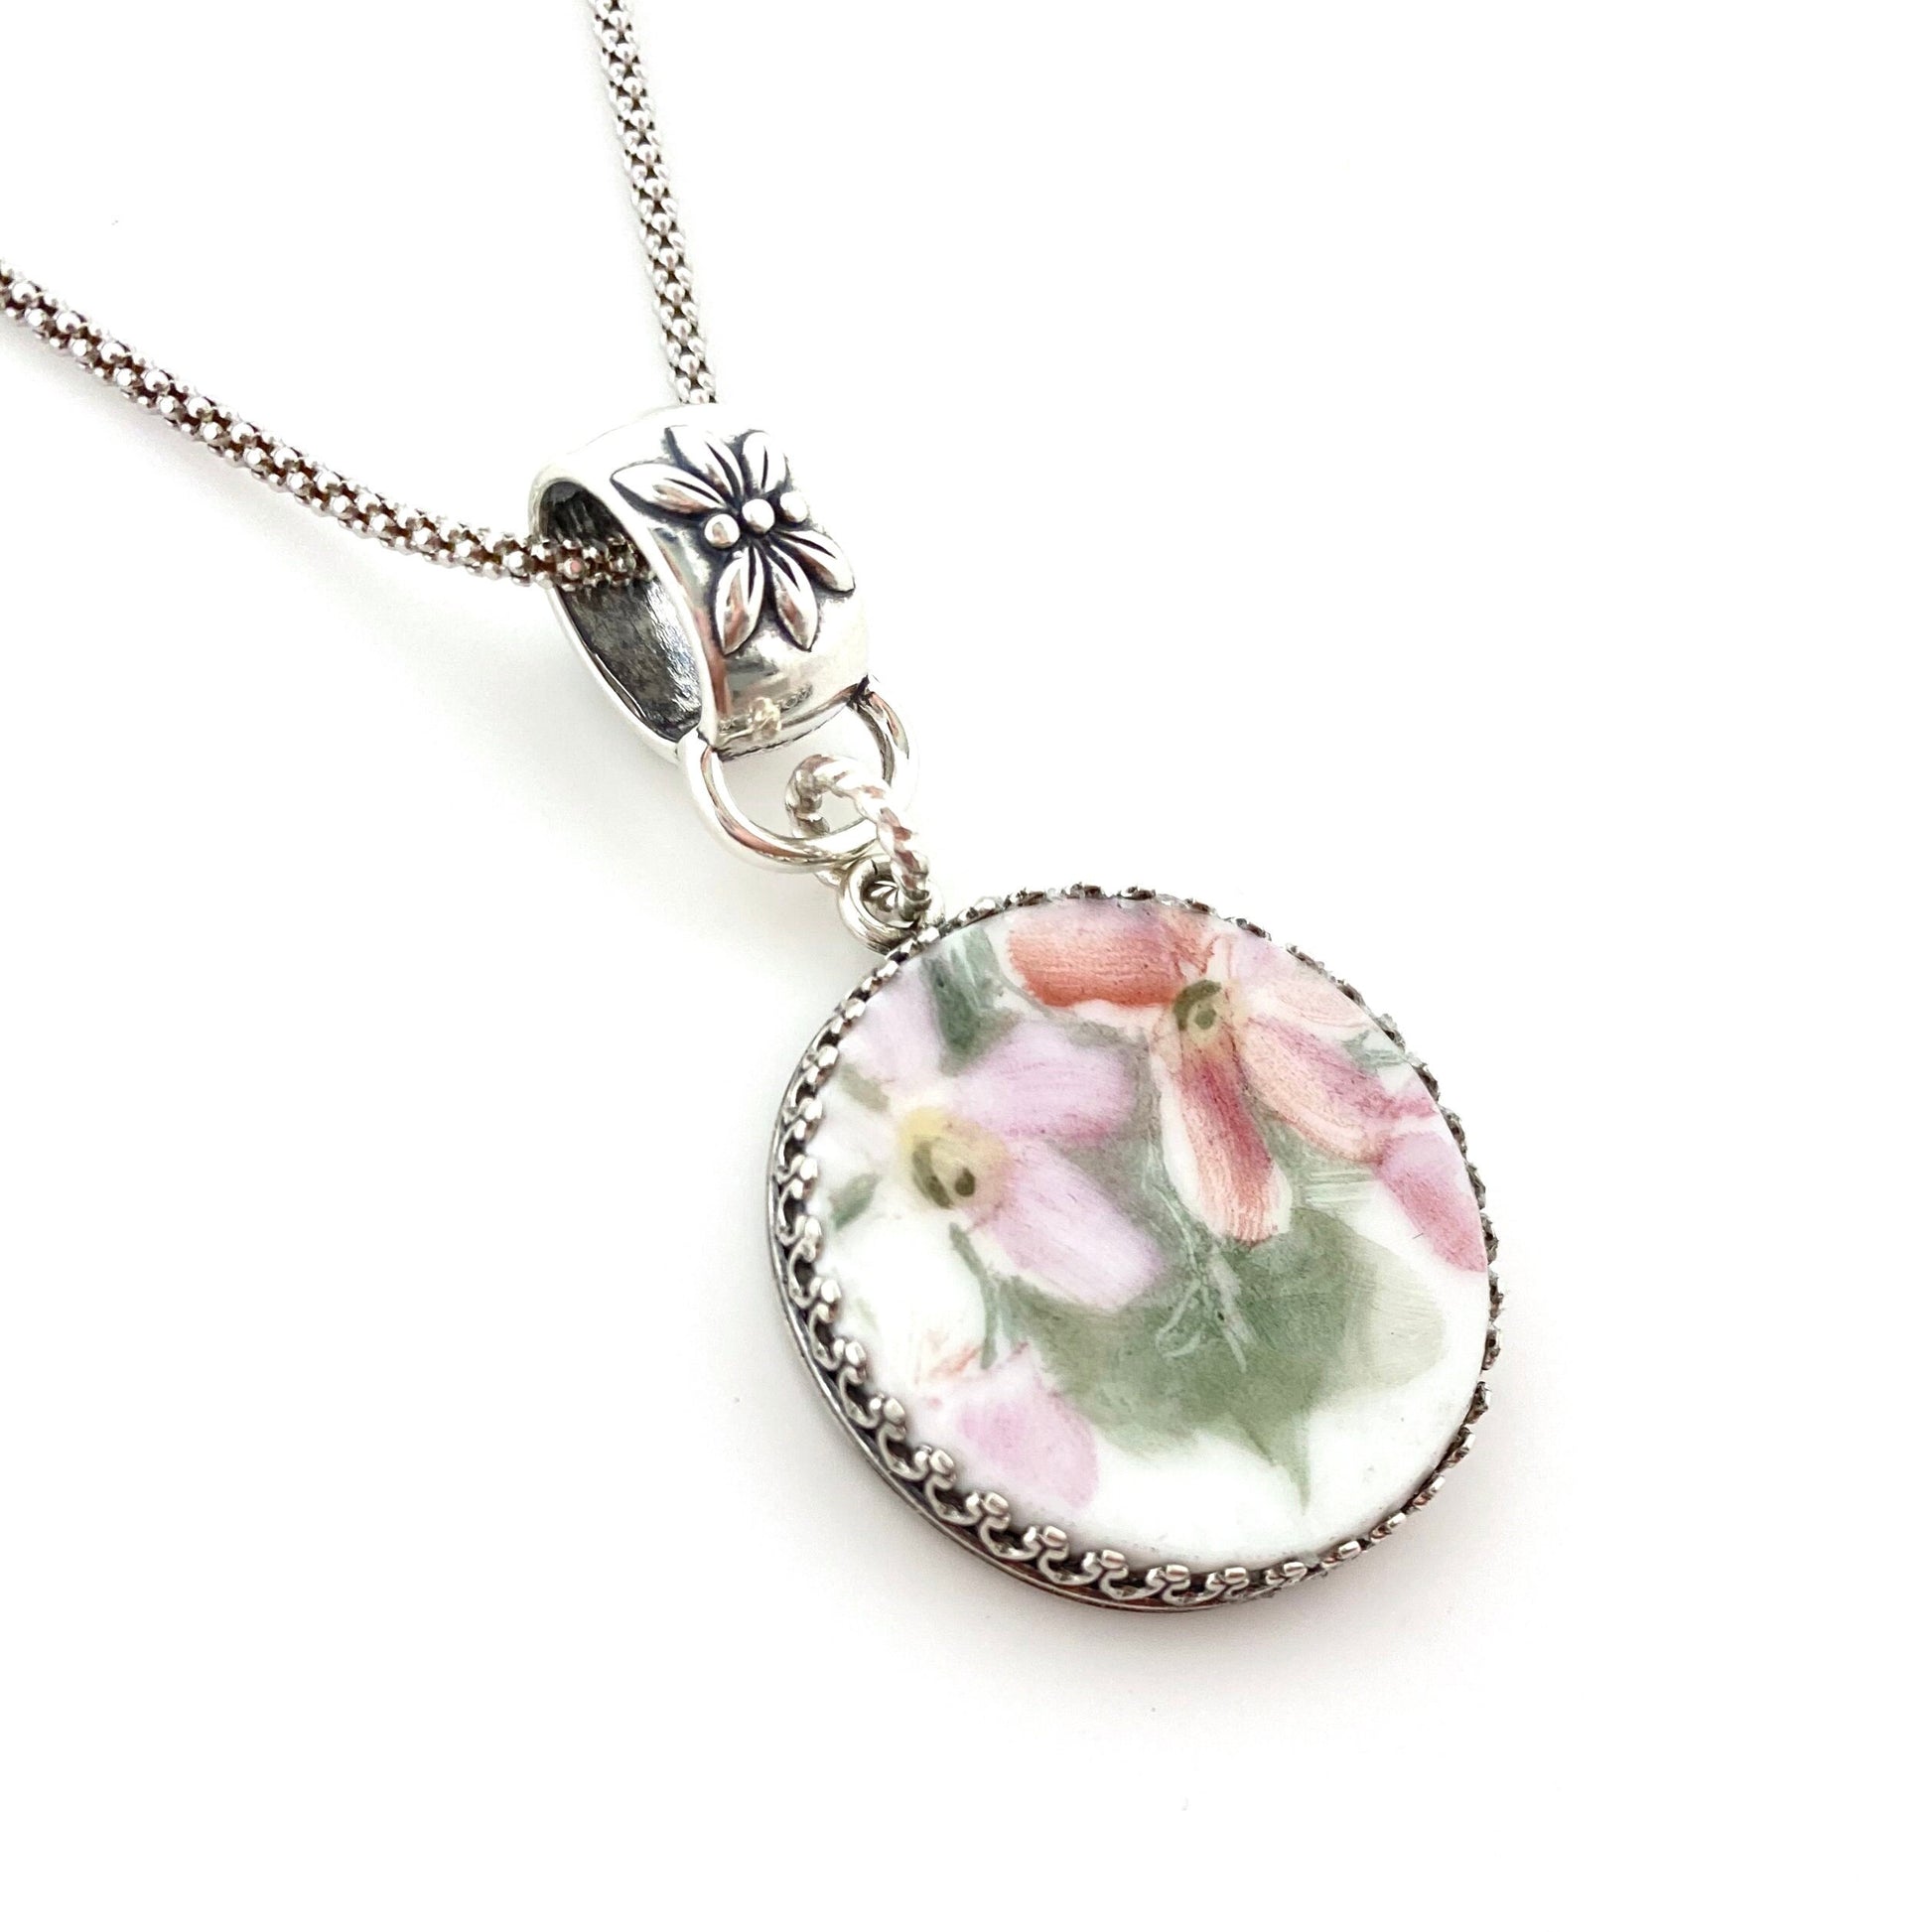 CUSTOM ORDER Custom Large Circle Necklace Floral Bale, Memorial Jewelry, Sister Mom Gift, Broken China Jewelry, Made From Your Family China